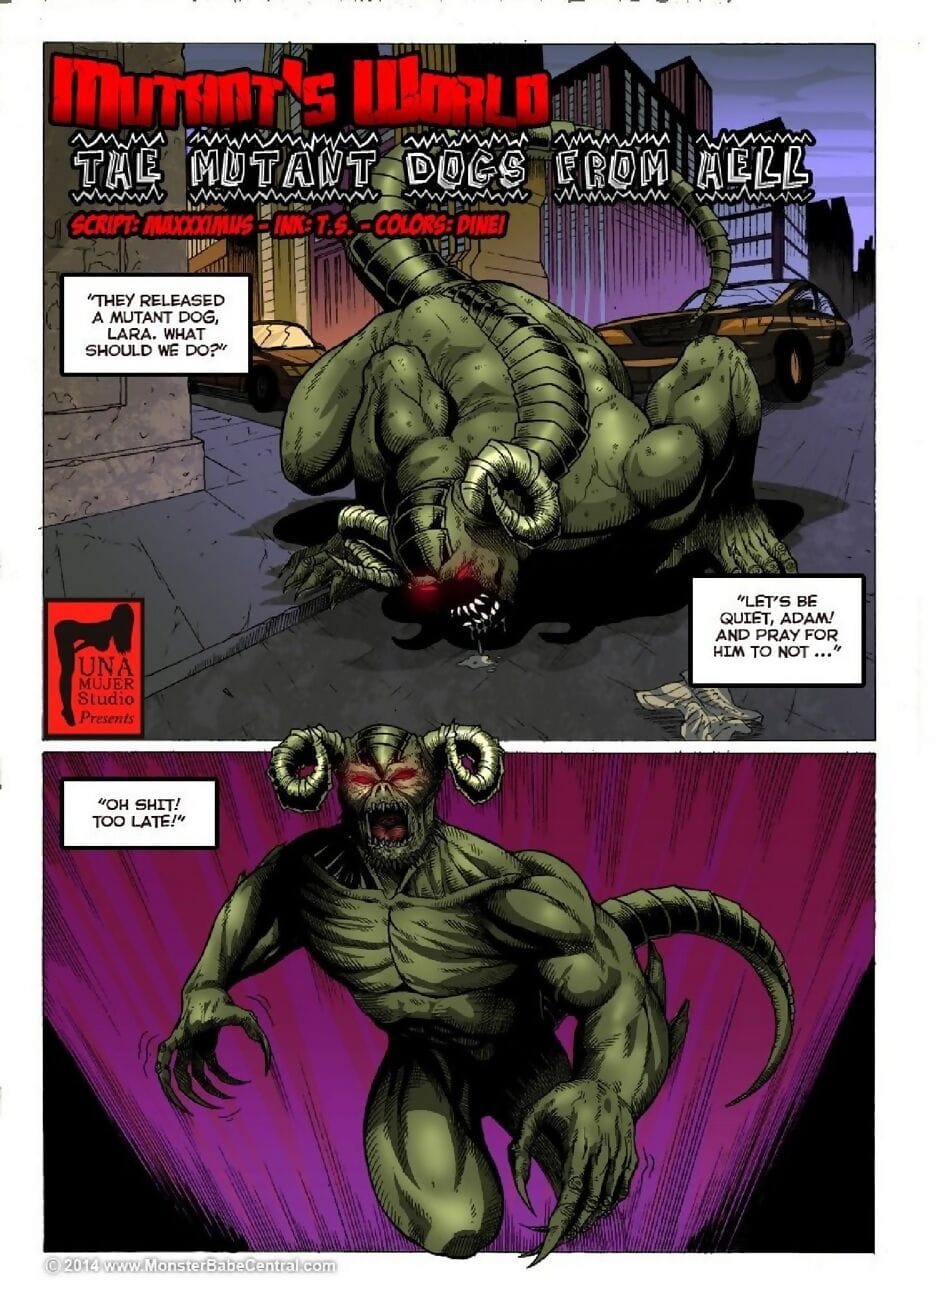 Mutants World 4 - The Mutant Dogs Fromâ€¦ page 1